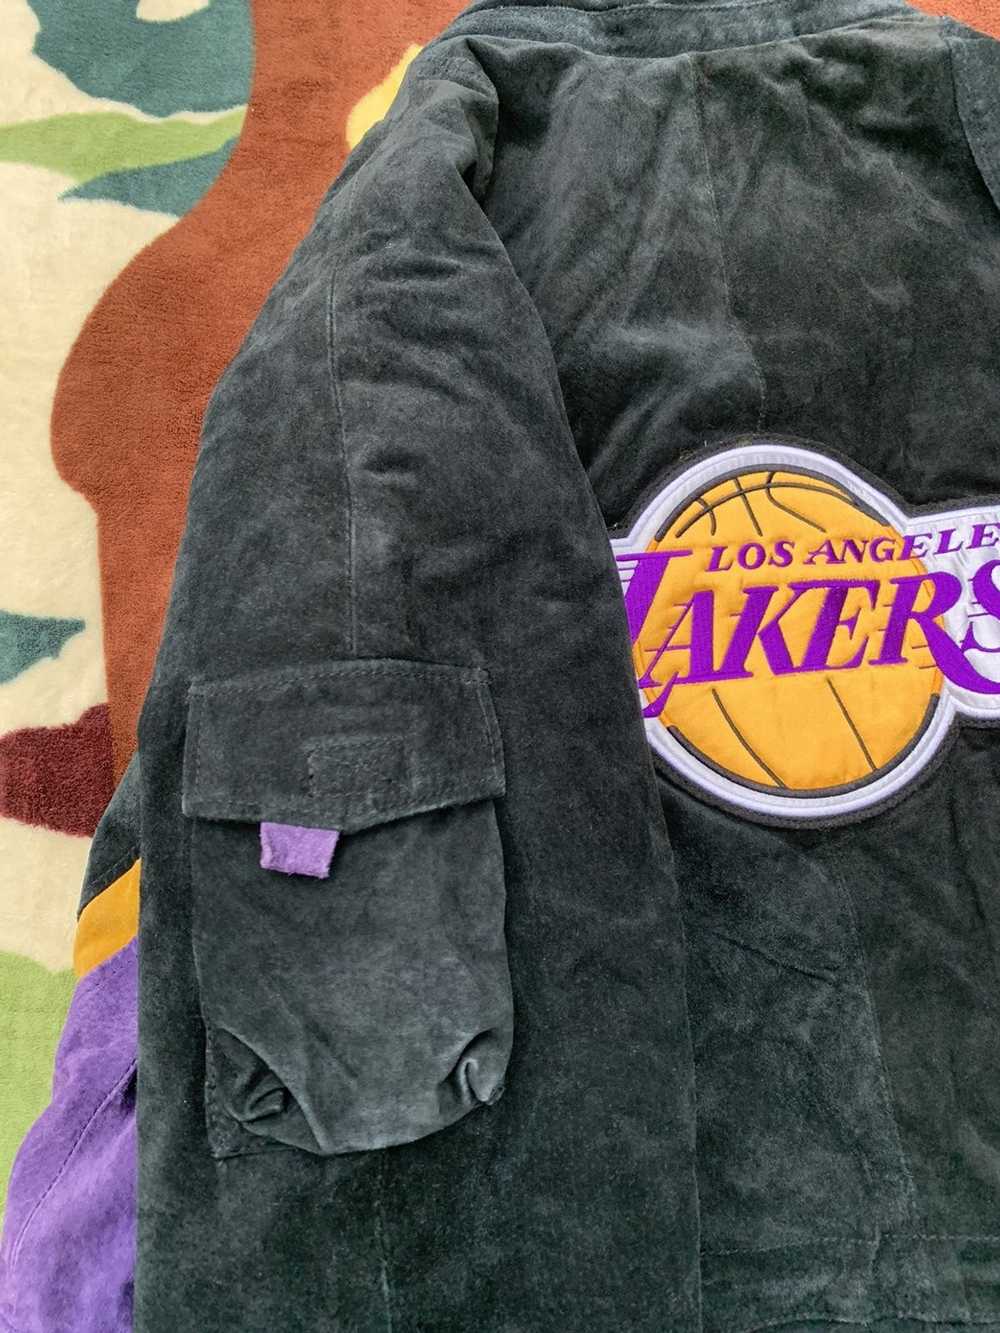 Lakers × NBA × Vintage Lakers Leather Coat - image 7